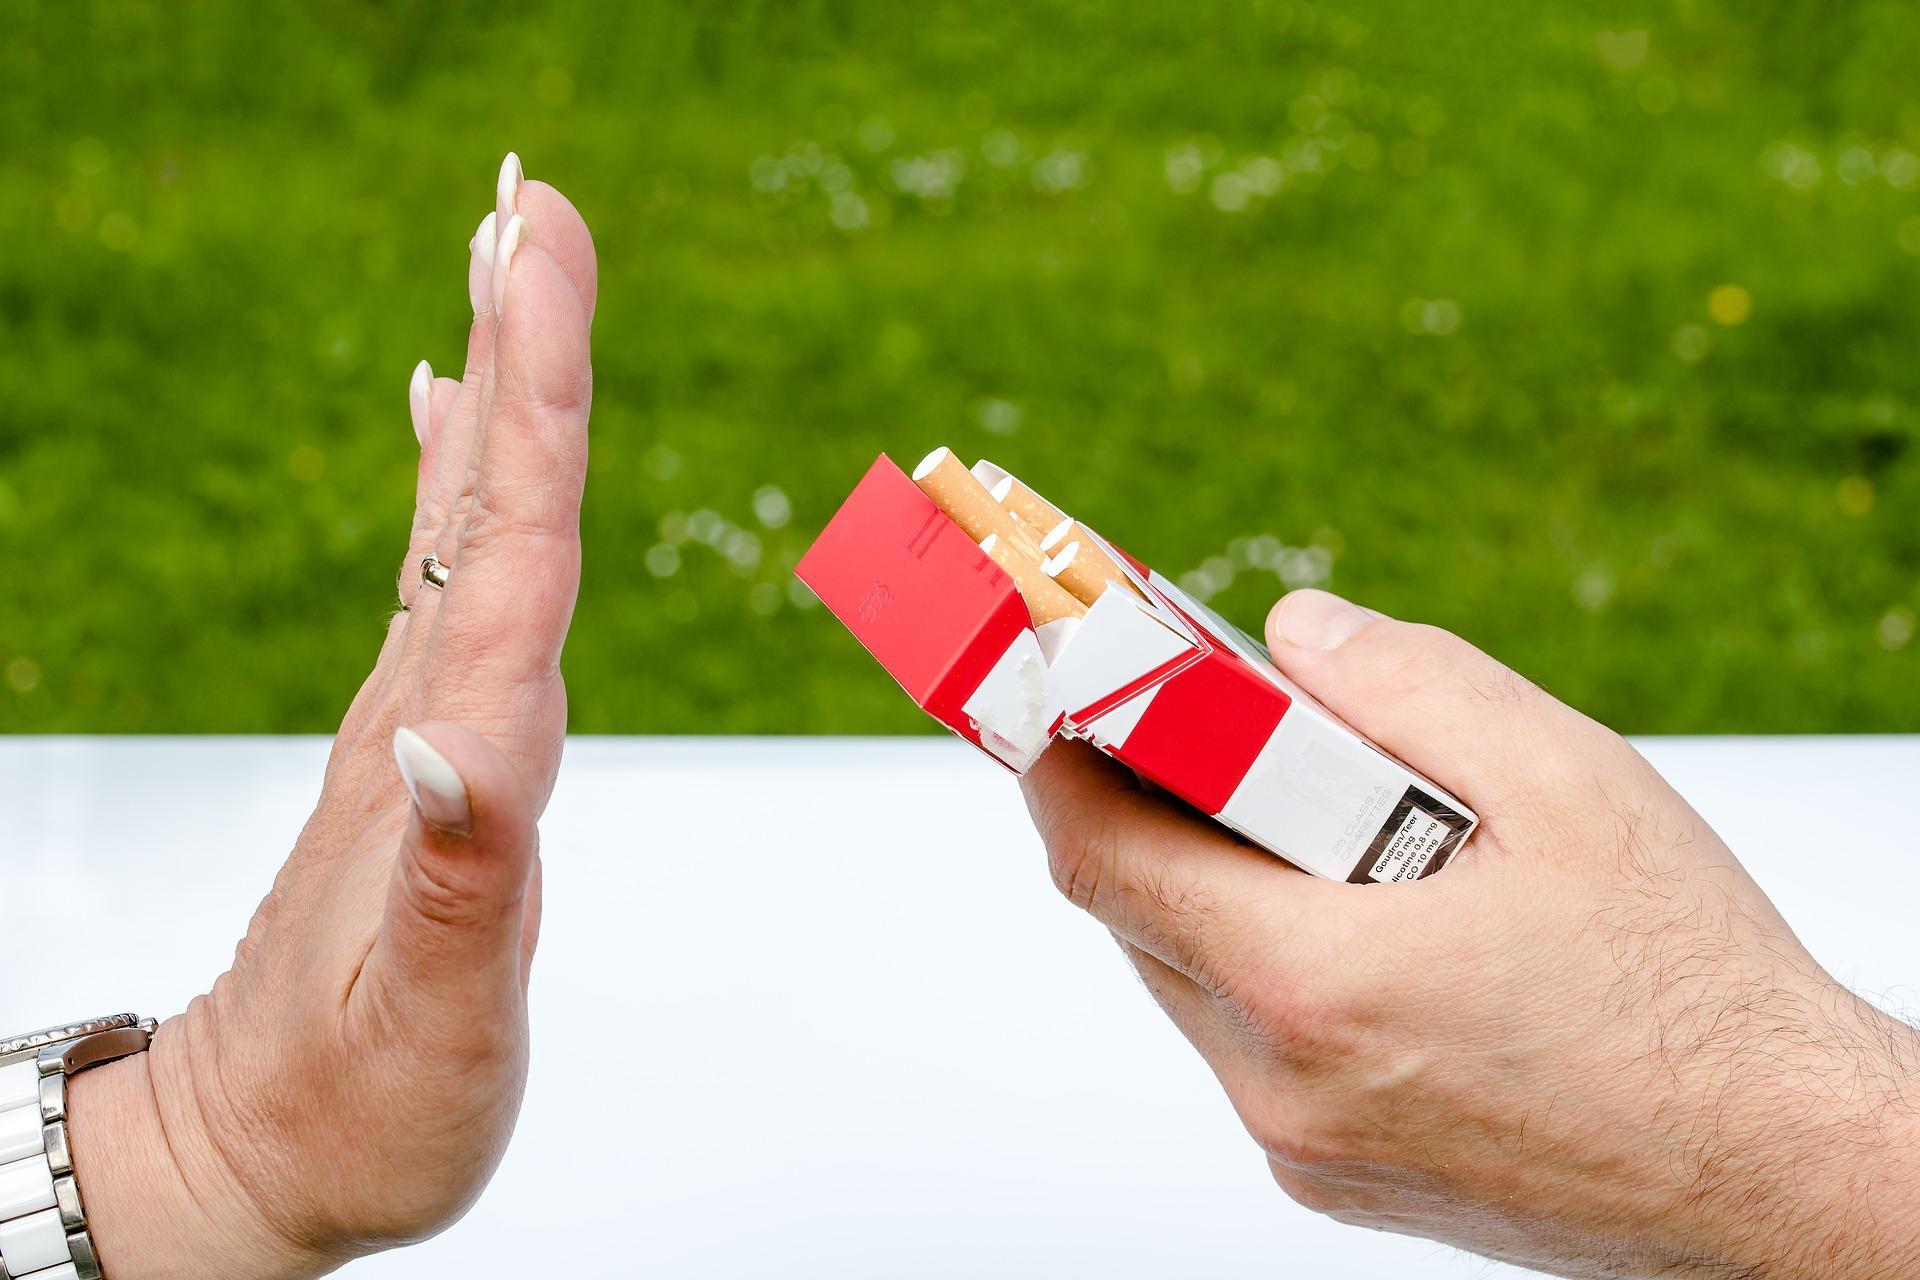 How to quit smoking slowly and permanently